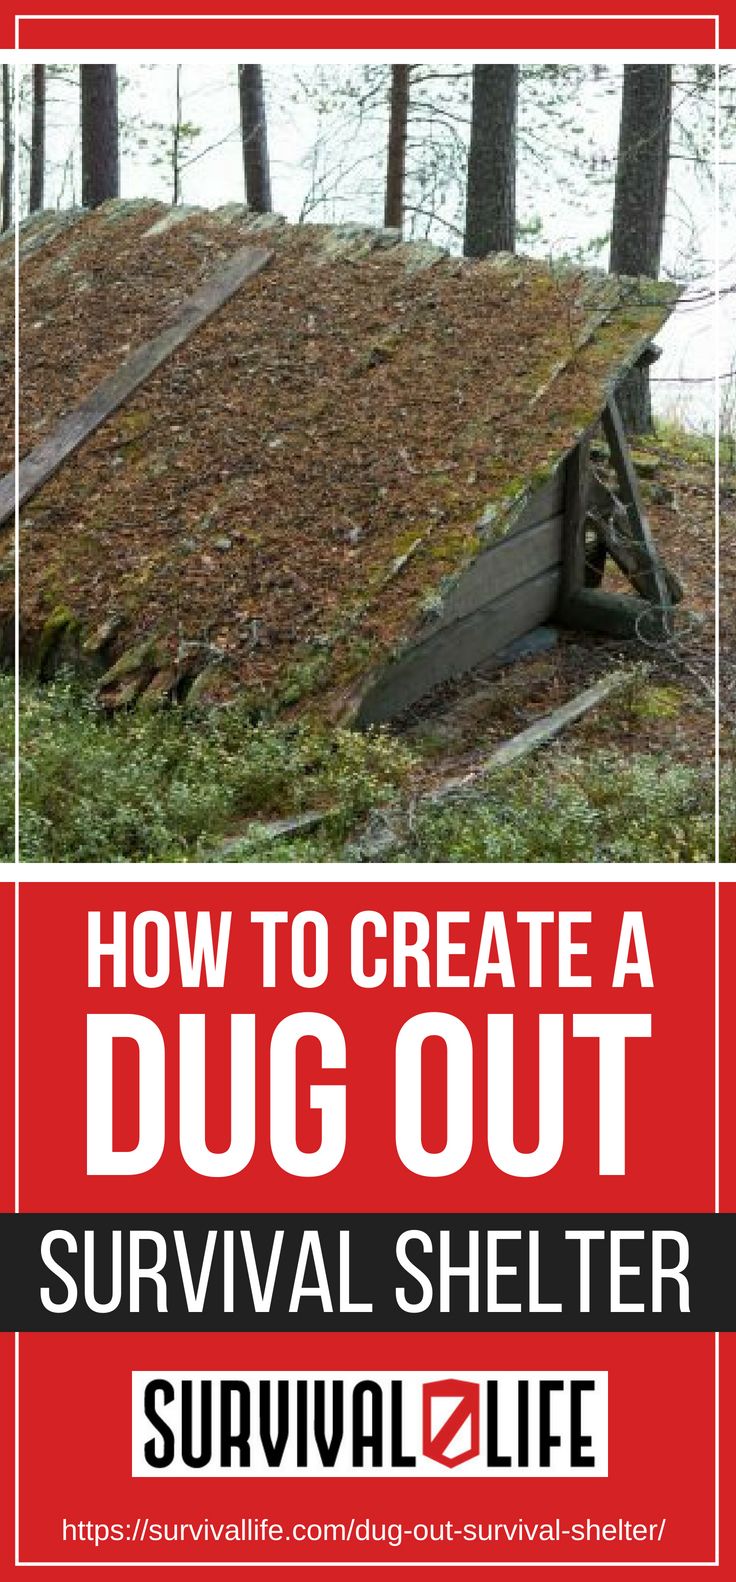 How To Create A Dug Out Survival Shelter | https://survivallife.com/dug-out-survival-shelter/